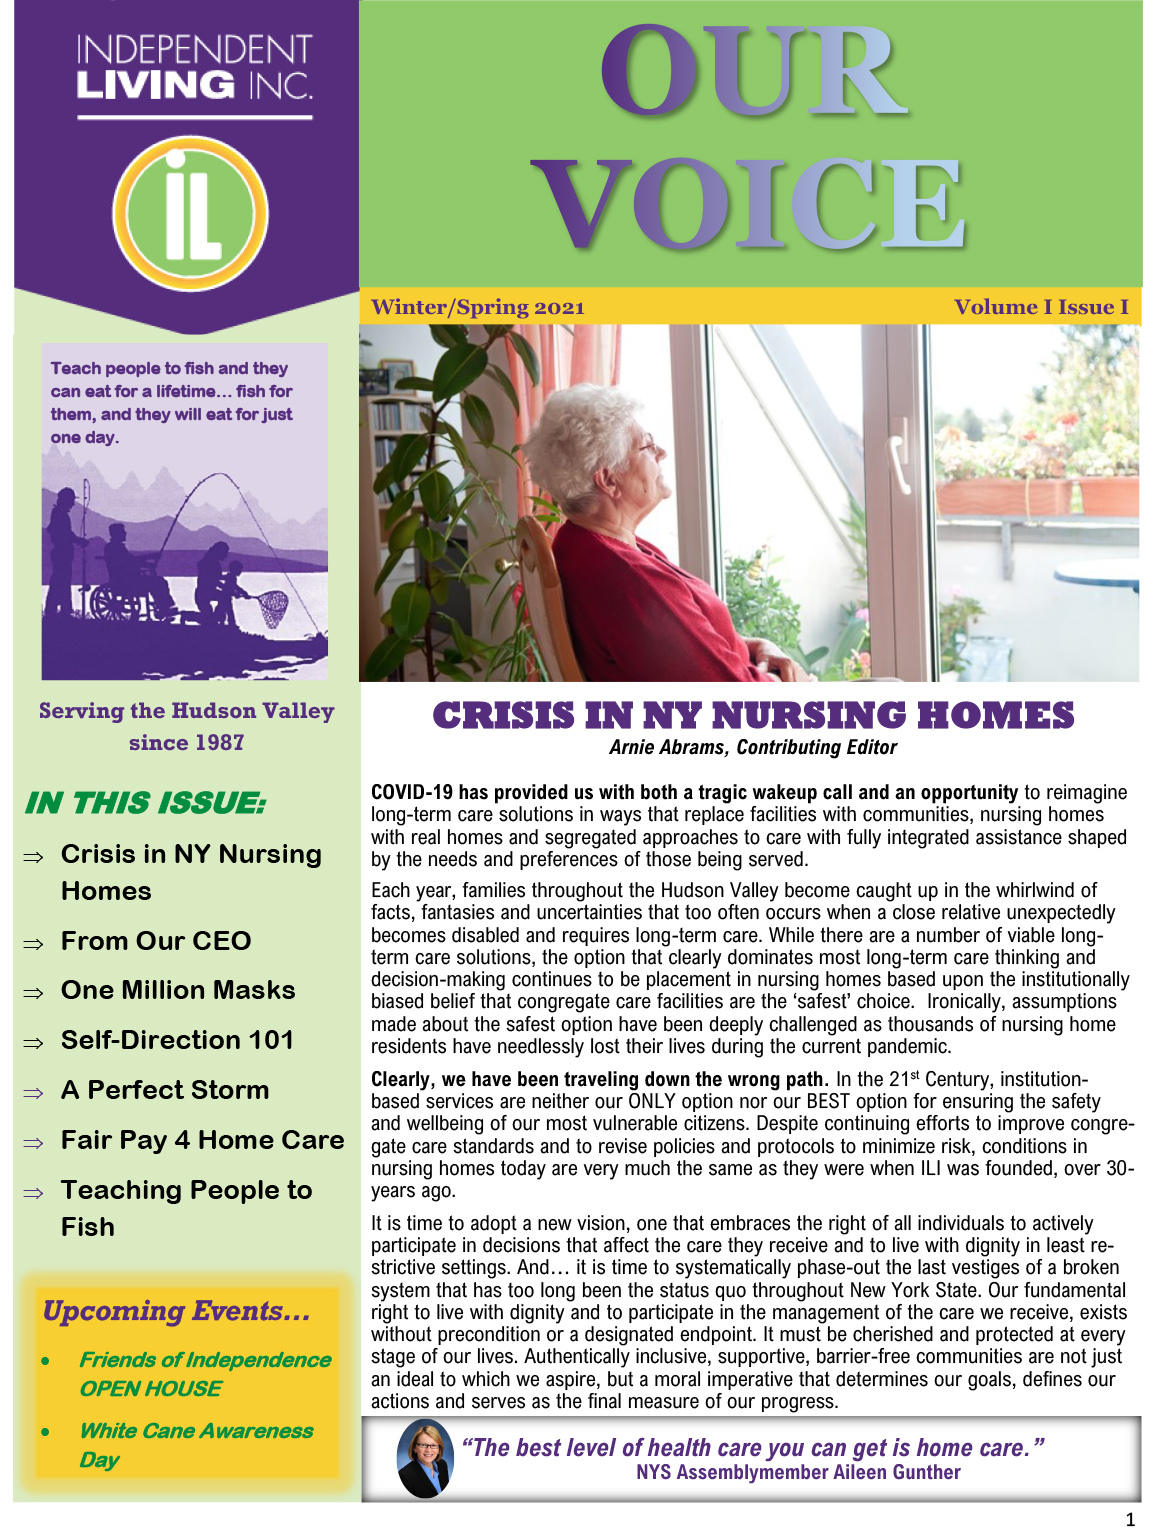 Our Voice newsletter spring 2021